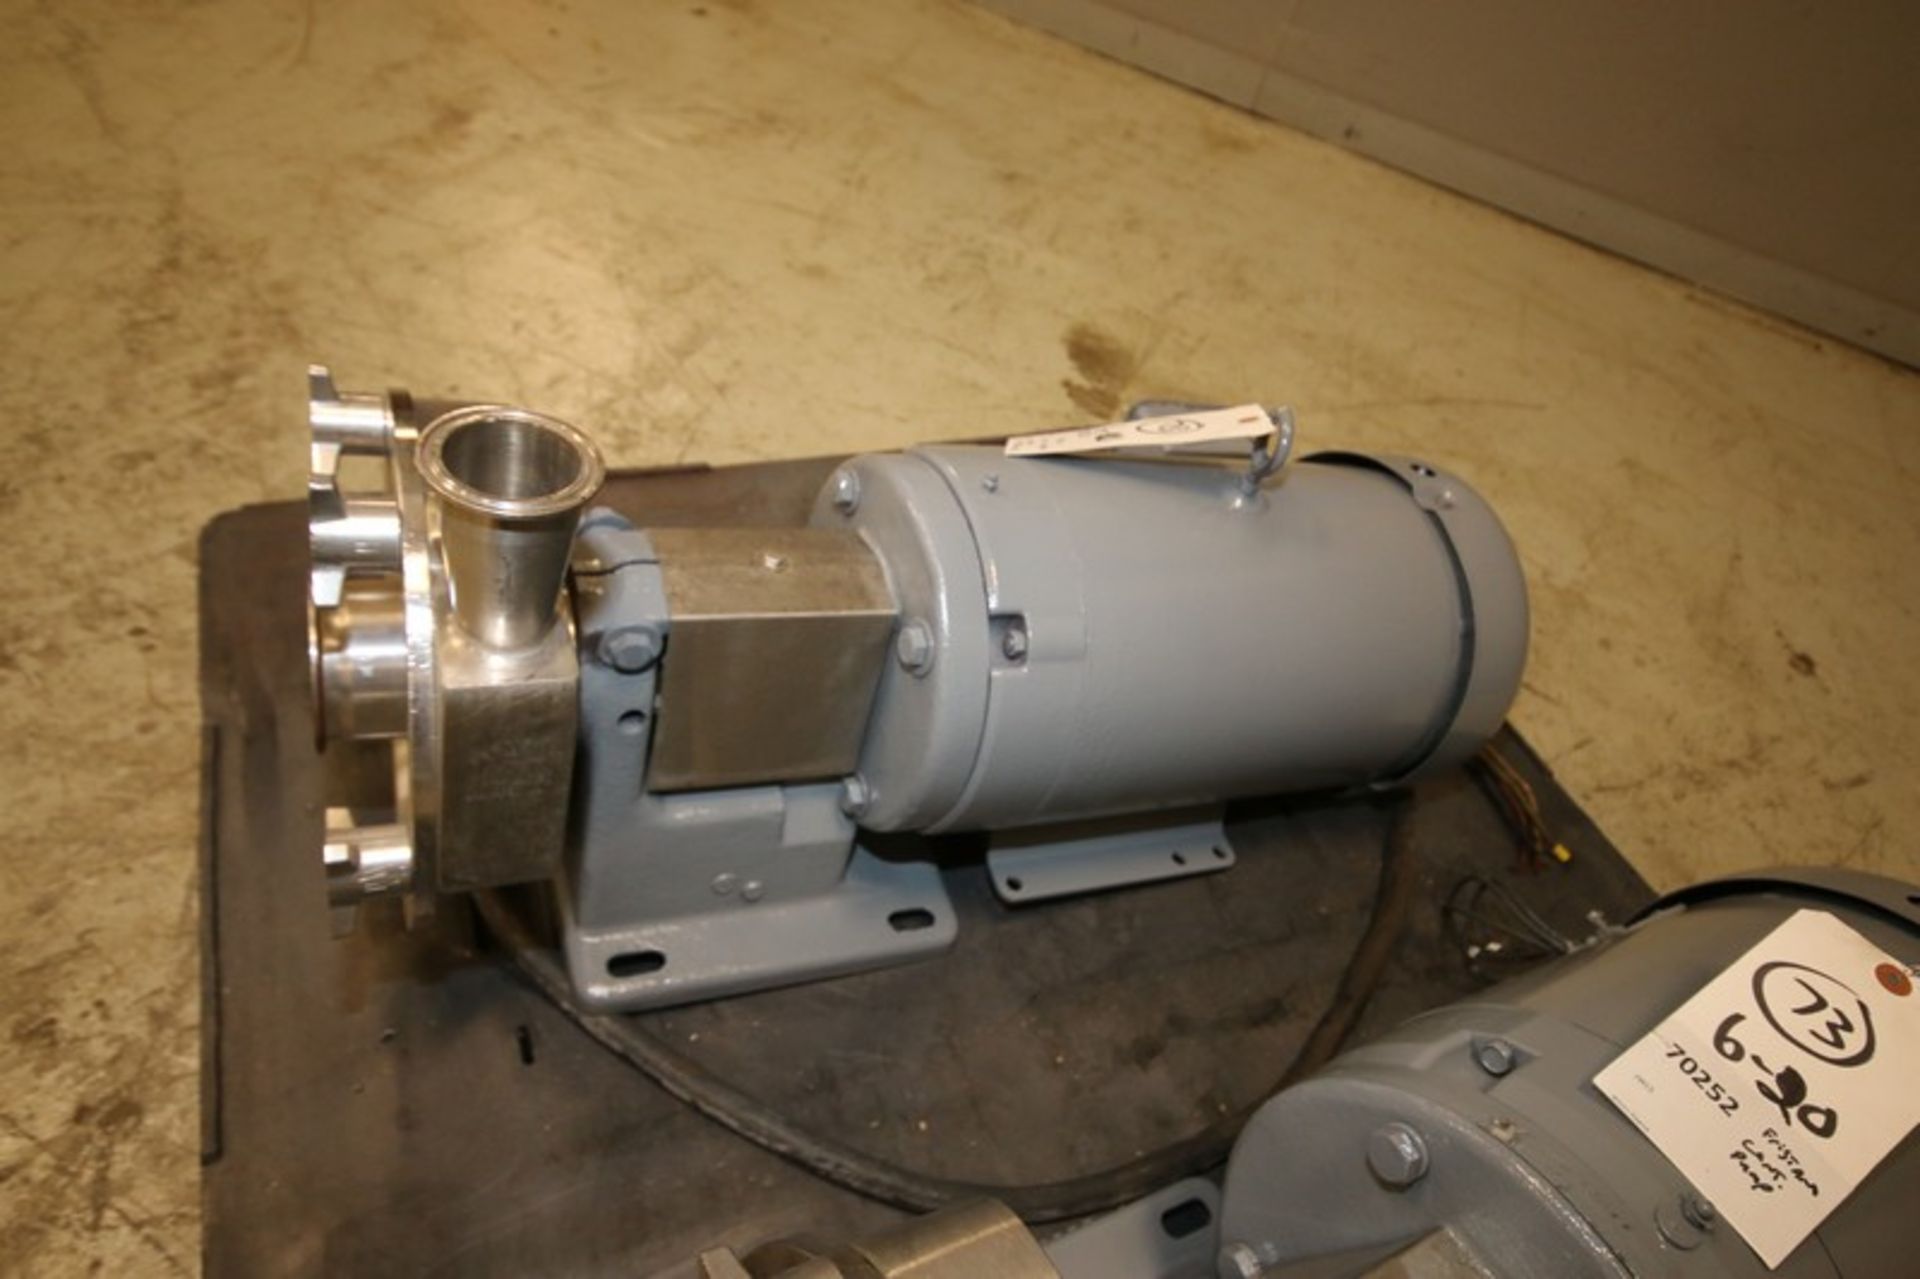 Fristam Aprox. 10 hp Centrifugal Pump, M/N FP1732-165, S/N FP175229739919, with Aprox. 2" x 3" Clamp - Image 4 of 5